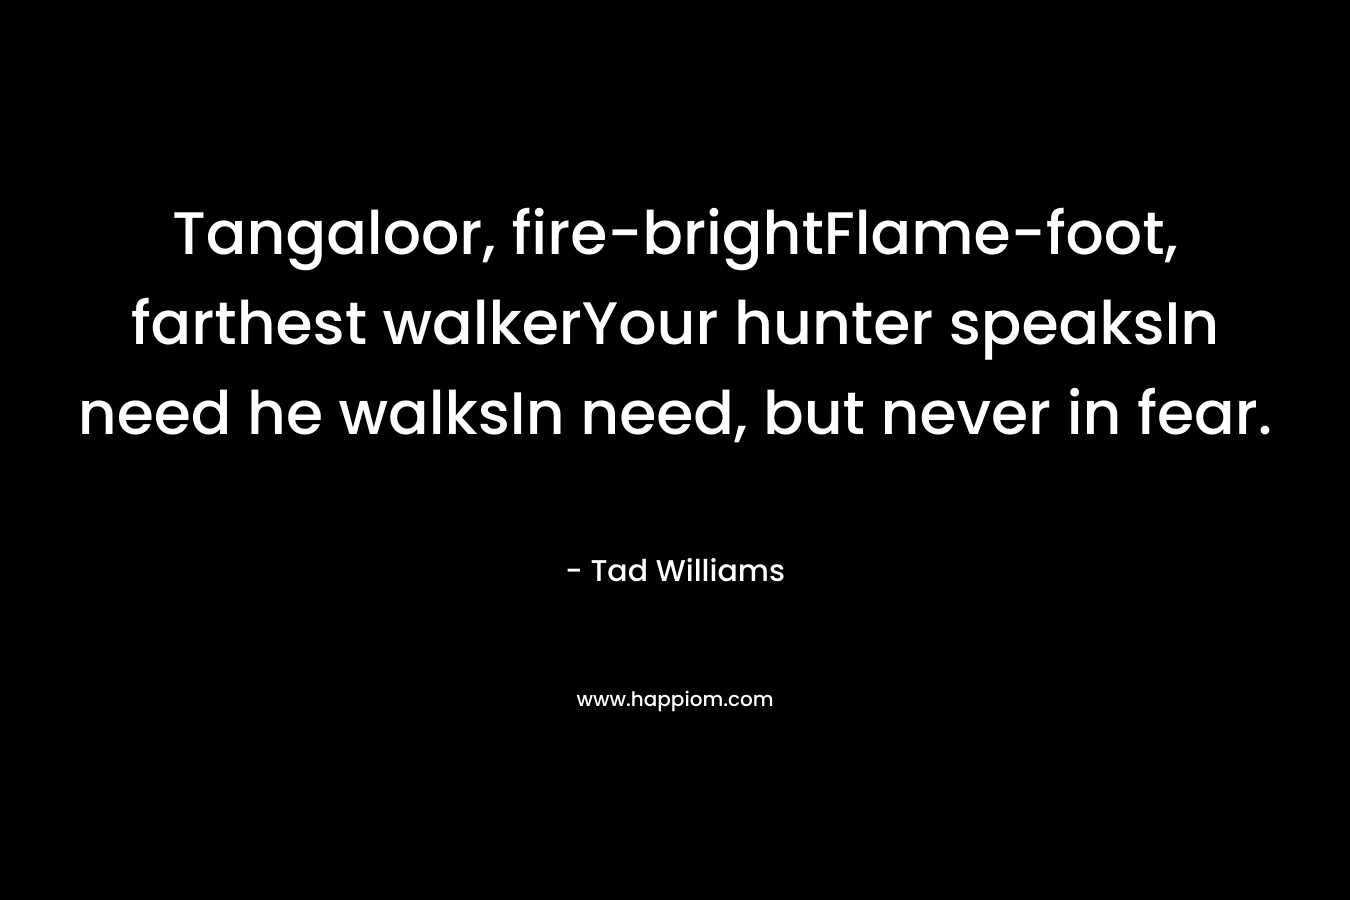 Tangaloor, fire-brightFlame-foot, farthest walkerYour hunter speaksIn need he walksIn need, but never in fear. – Tad Williams